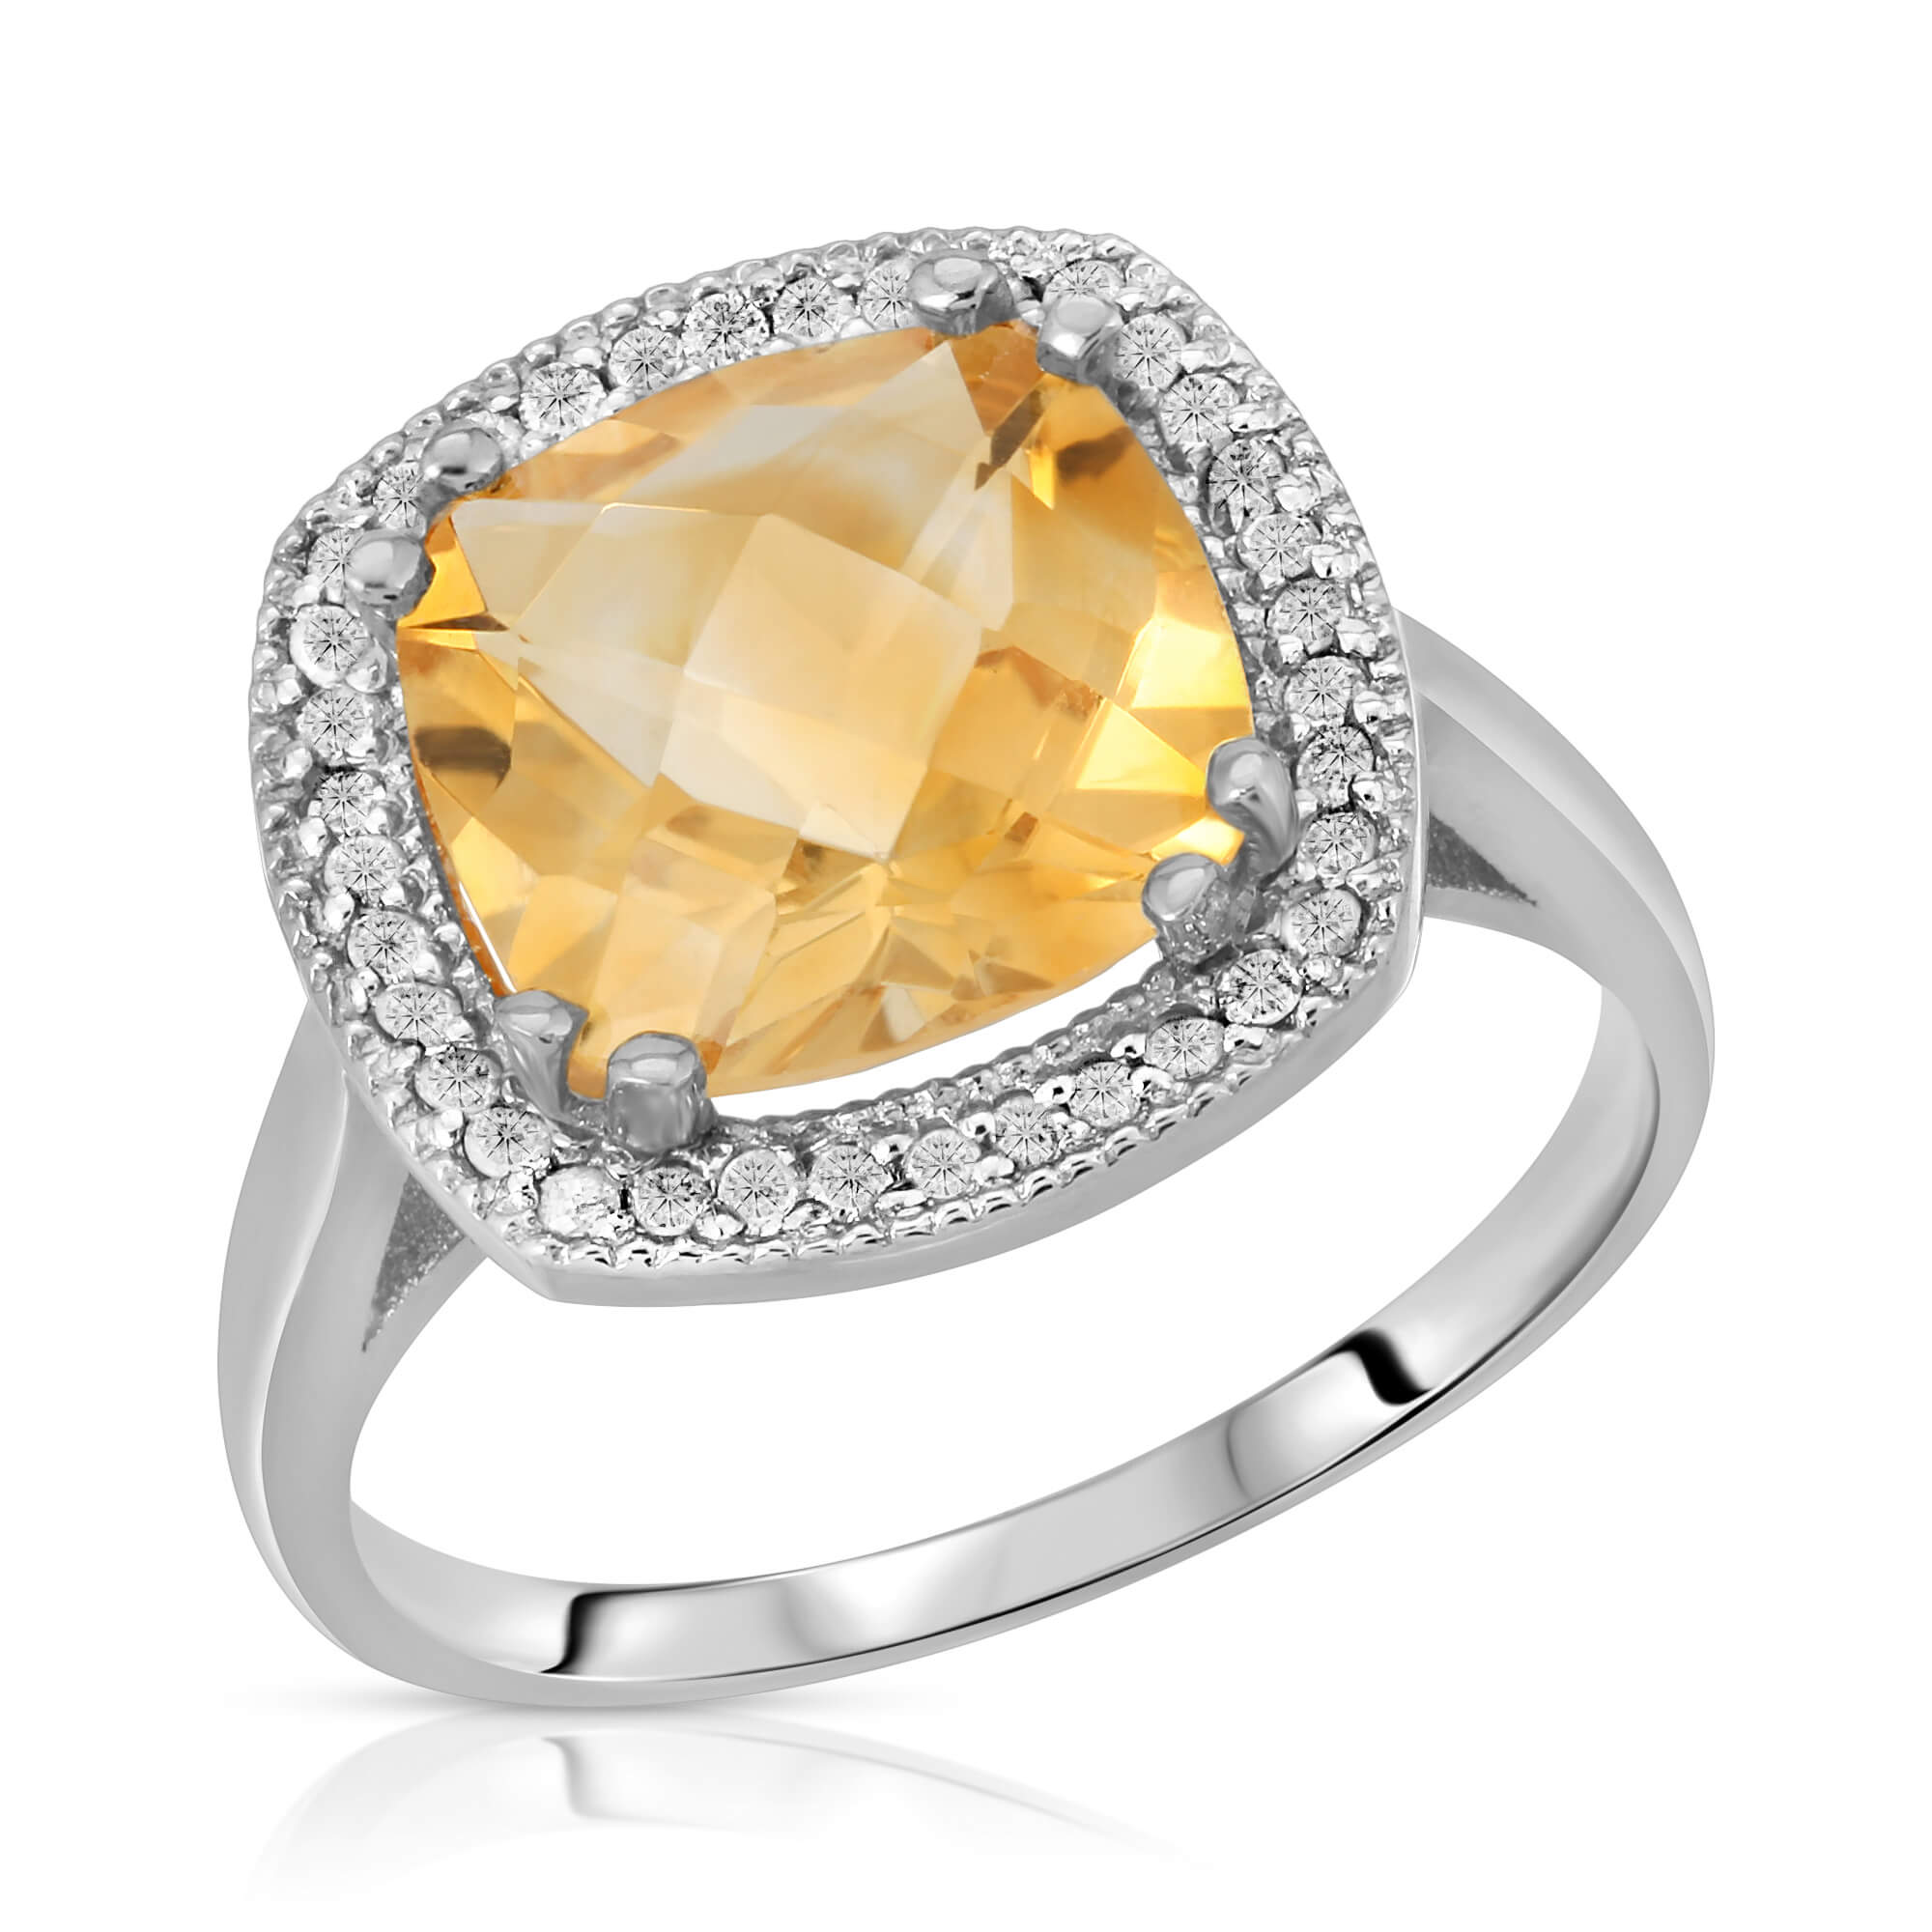 Cushion Cut Citrine Ring 3.8 ctw in 9ct White Gold